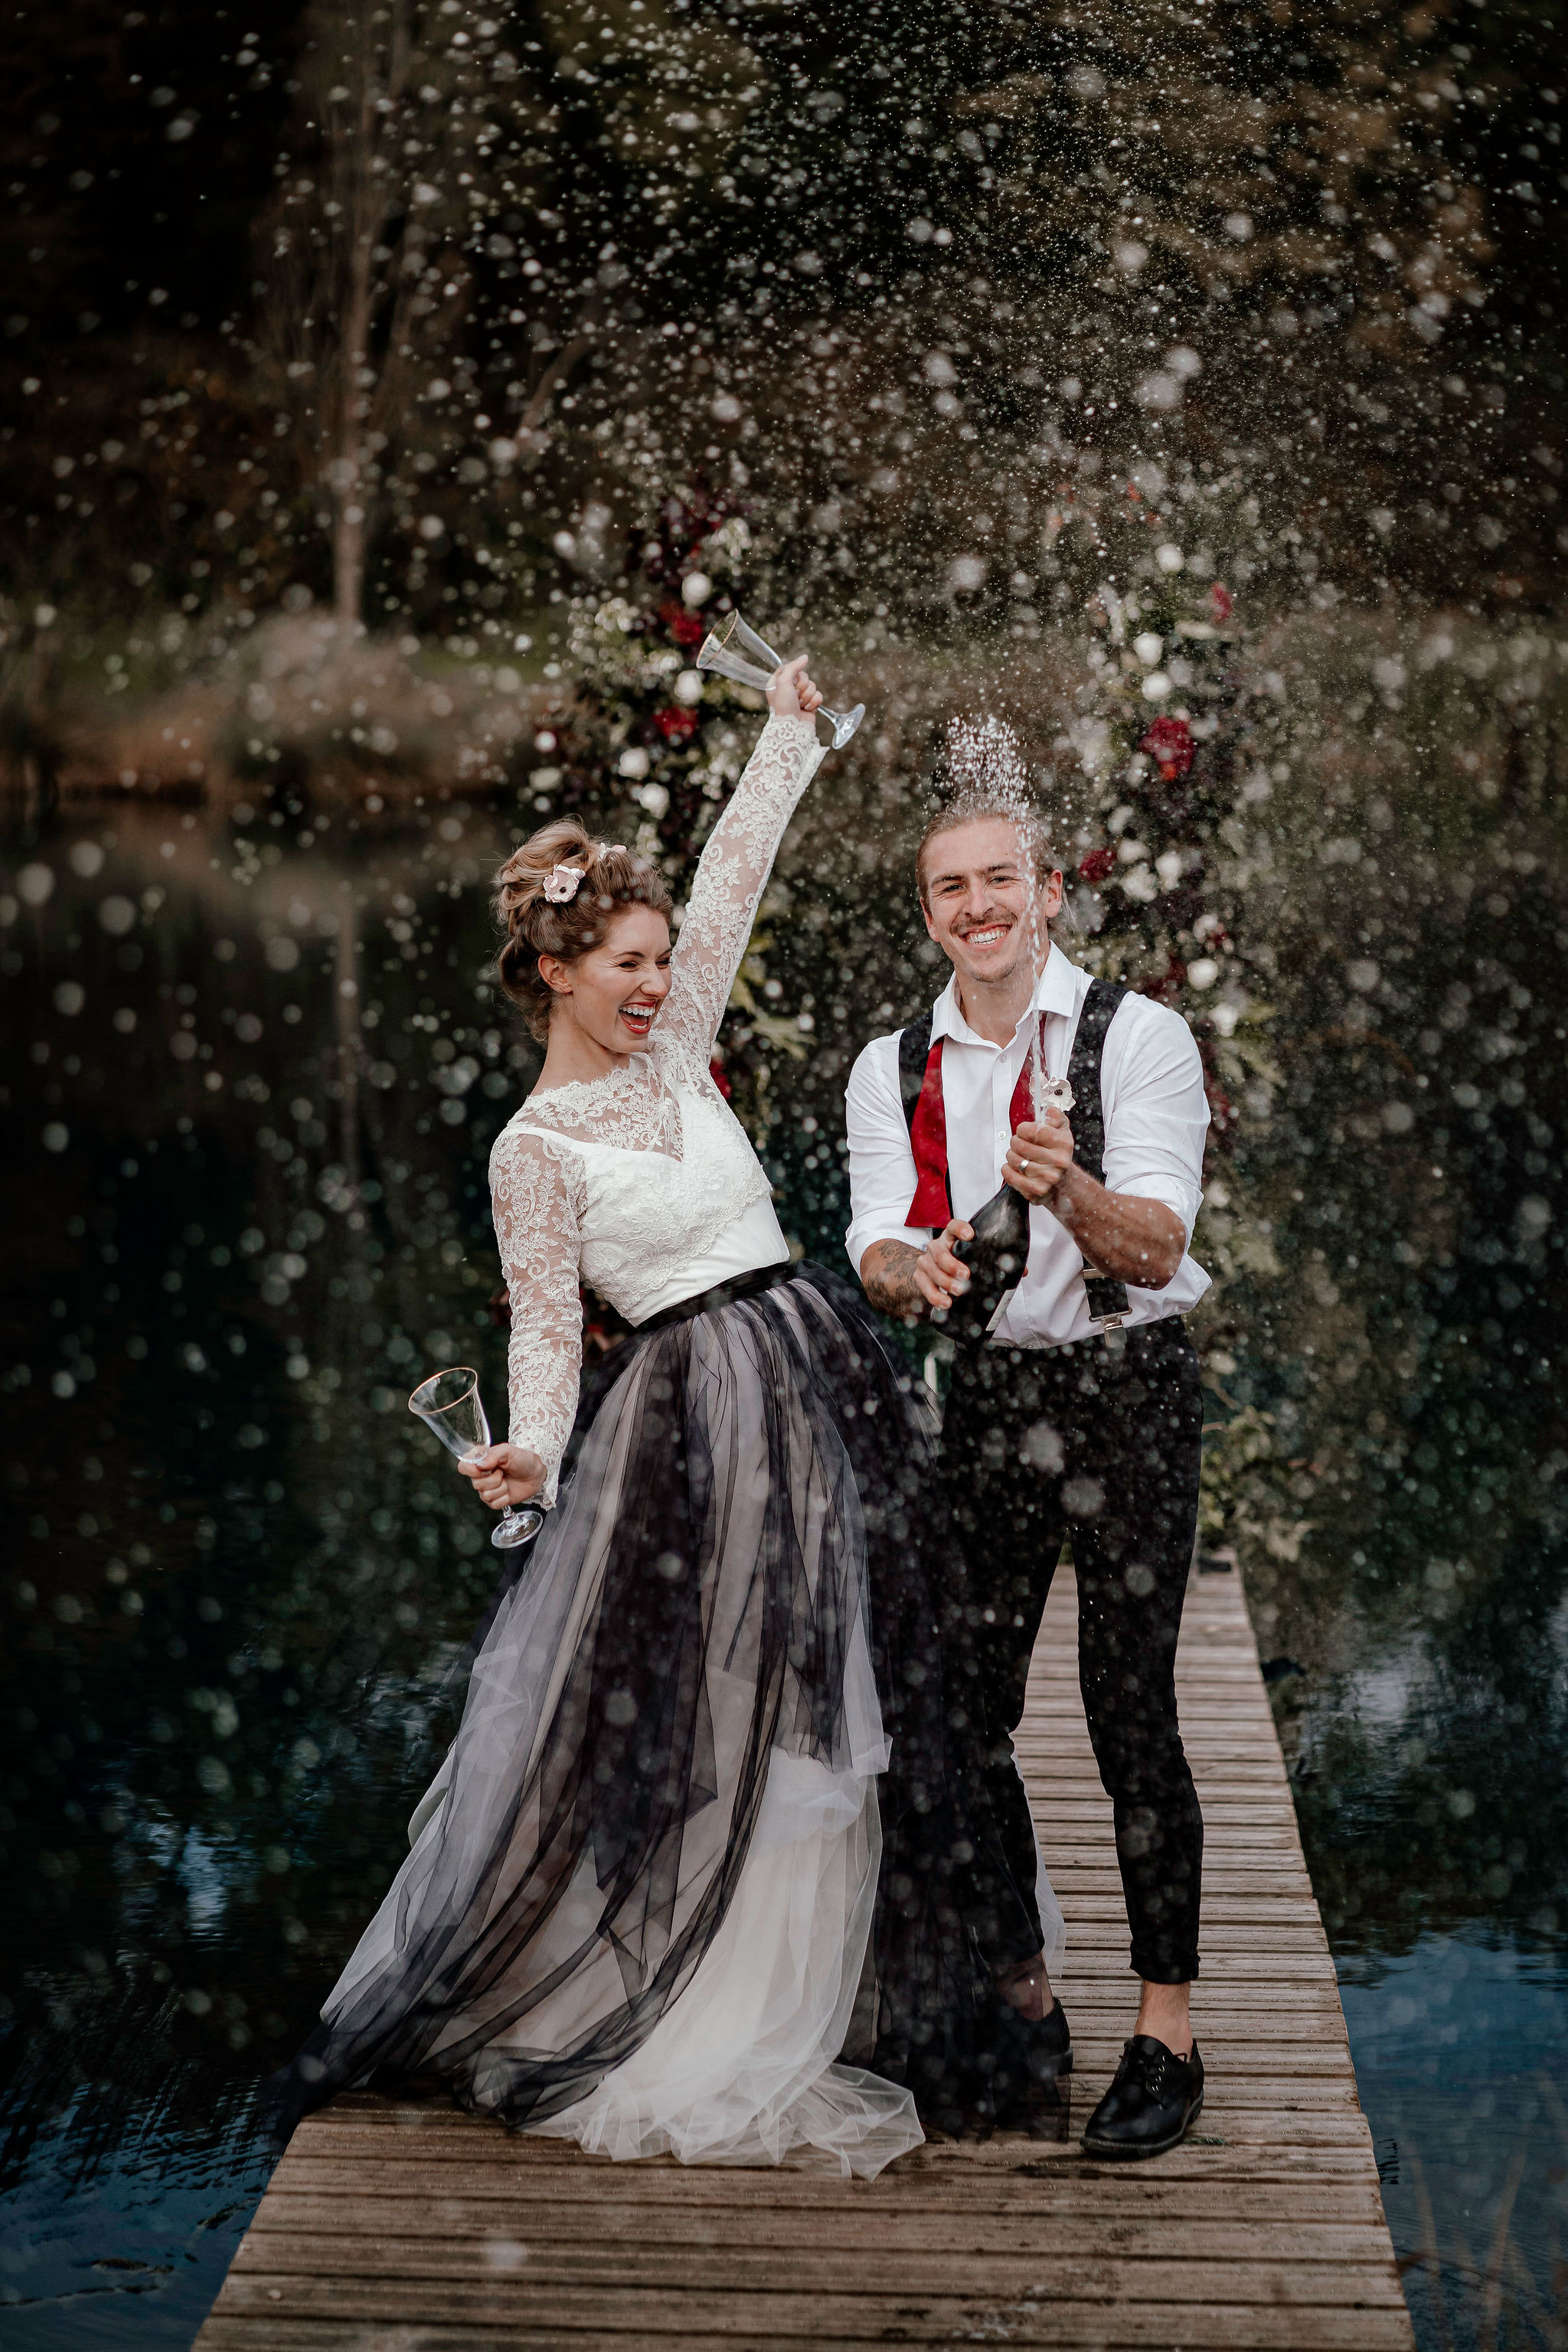 Ryley and Flynn - alternative wedding dress - black and white wedding dress - They will be joining us at our Nottingham wedding fair